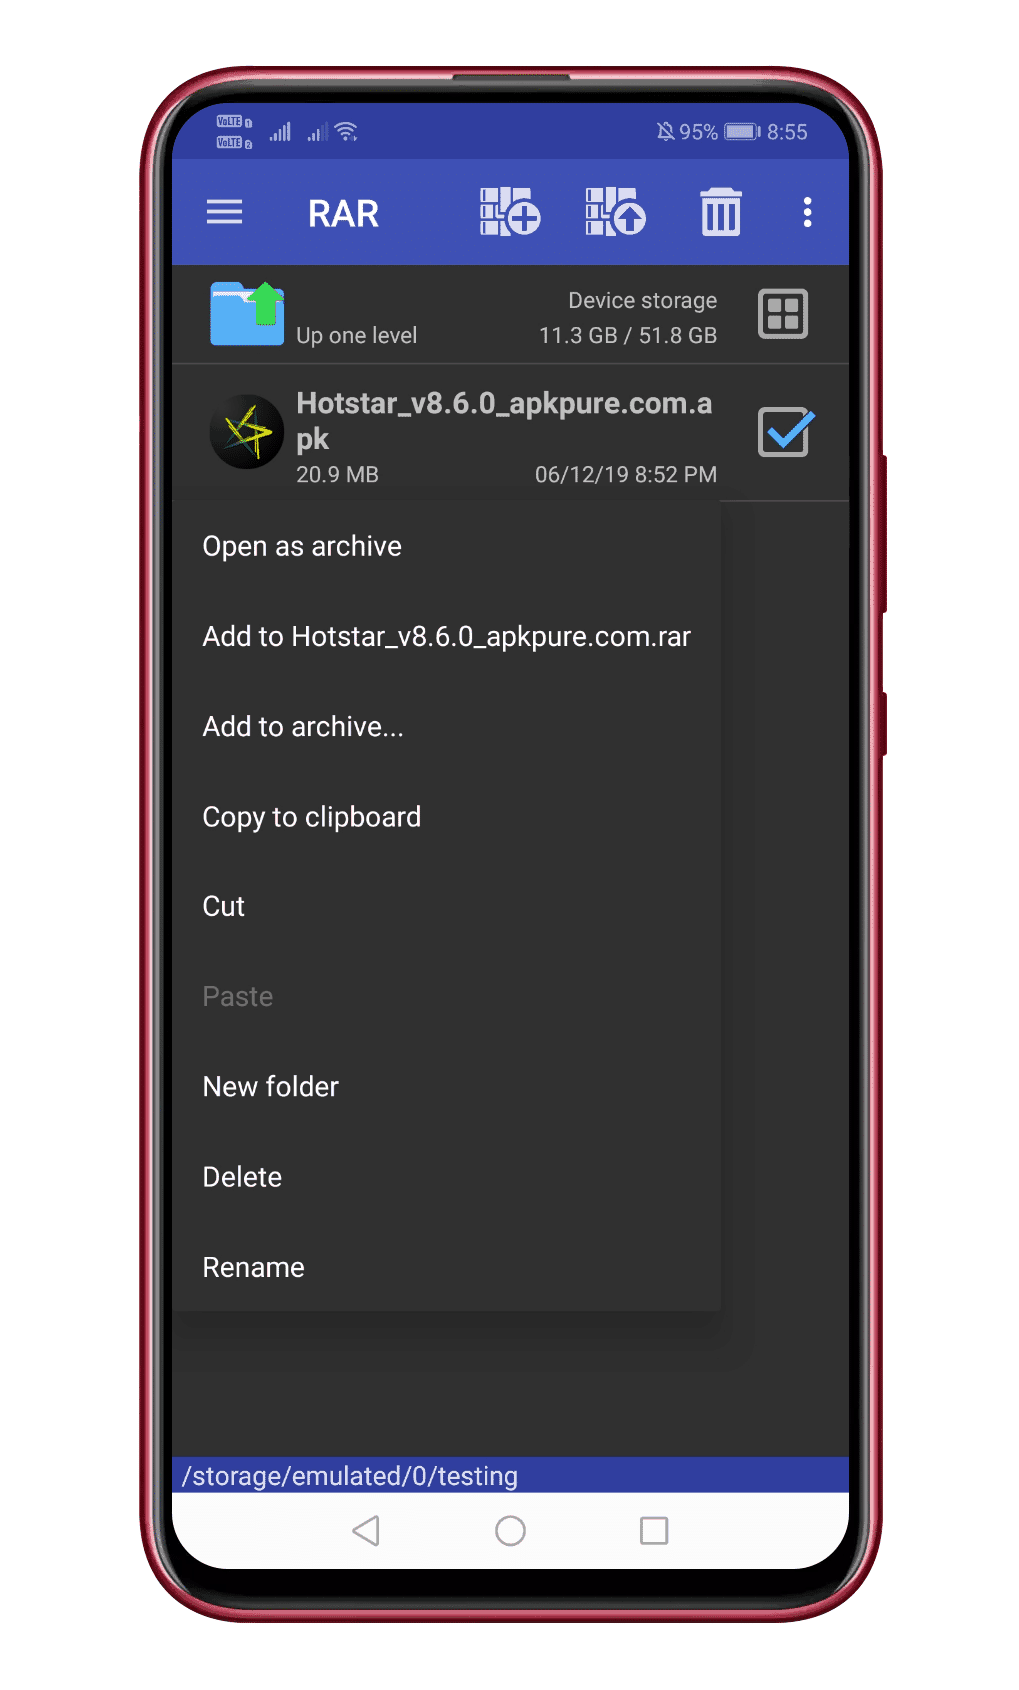 Tap On Add To Archive Option